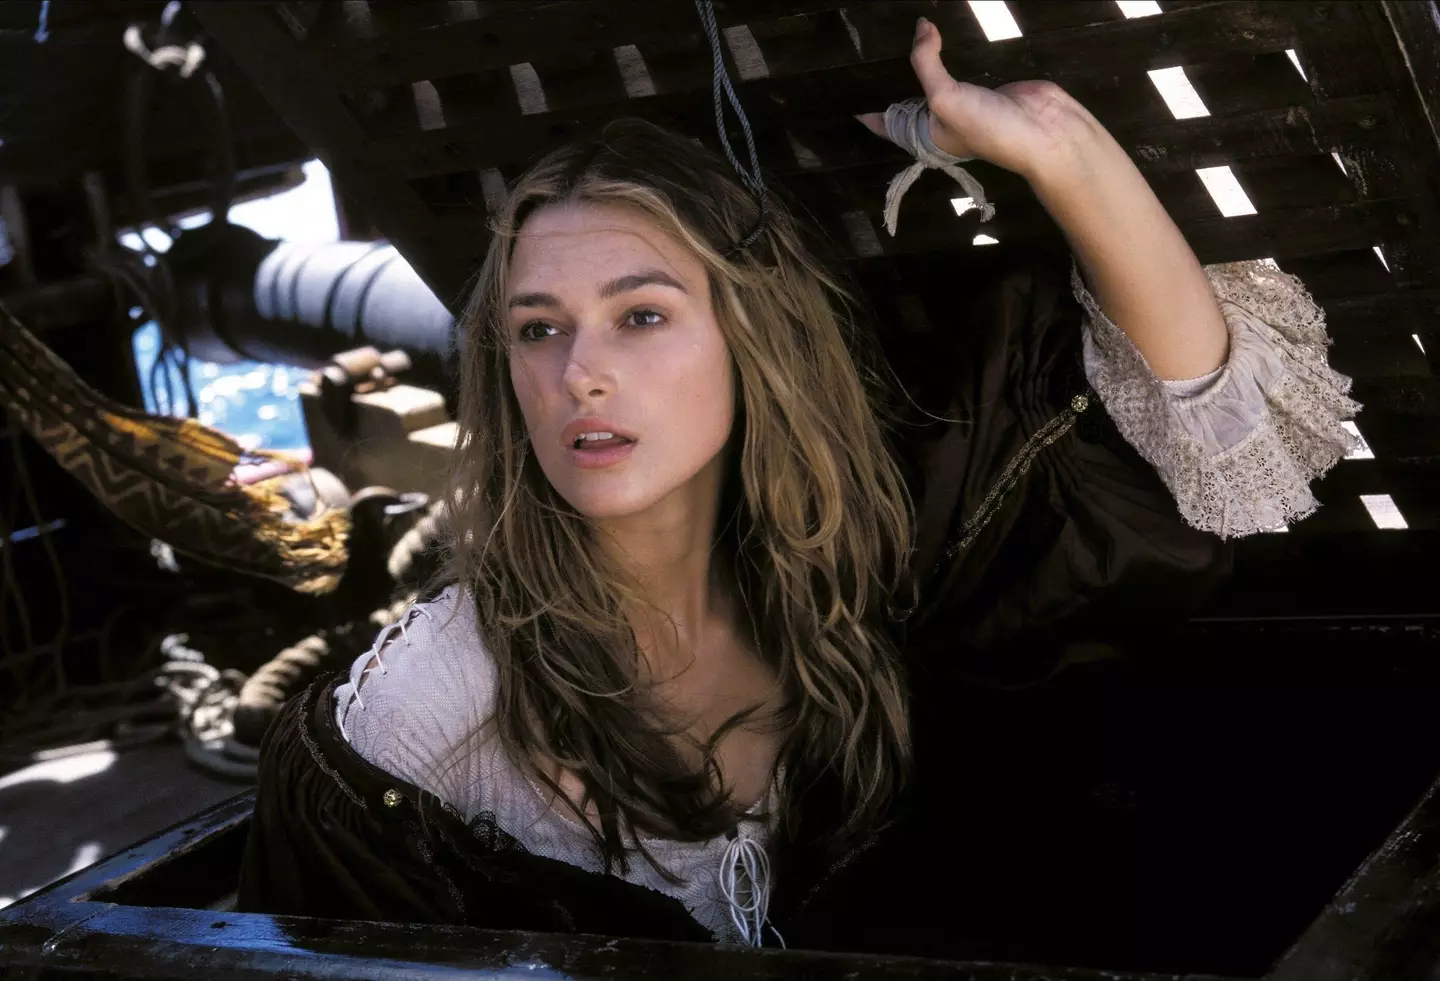 Keira Knightley said she felt 'caged' after Pirates of the Caribbean.